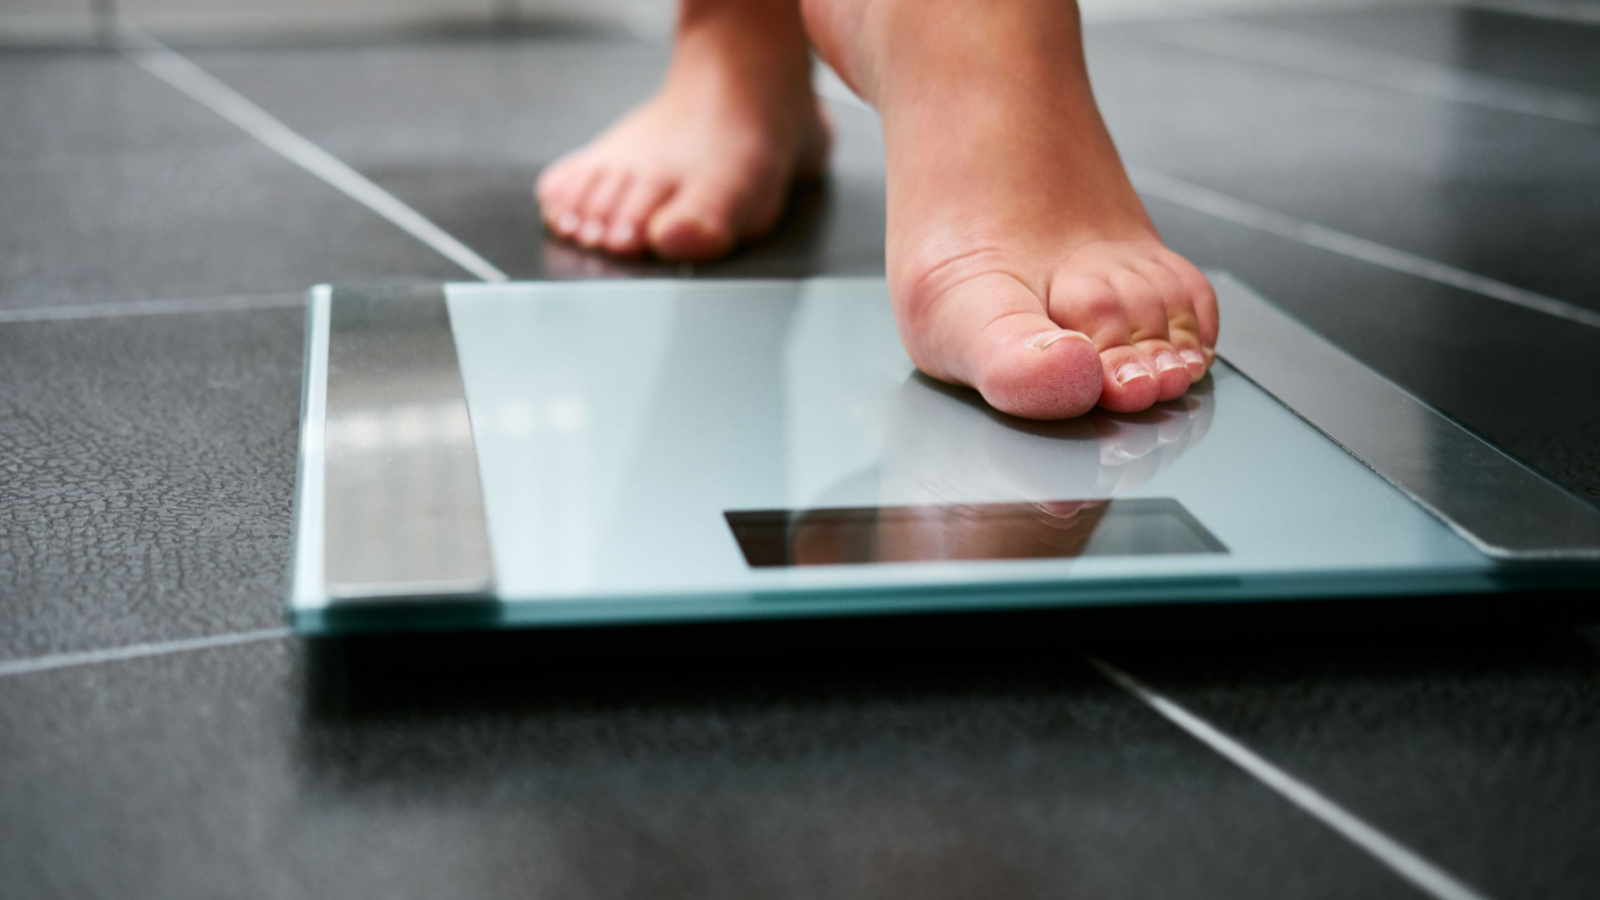 A person stepping on a scale representing BNSO Stock.